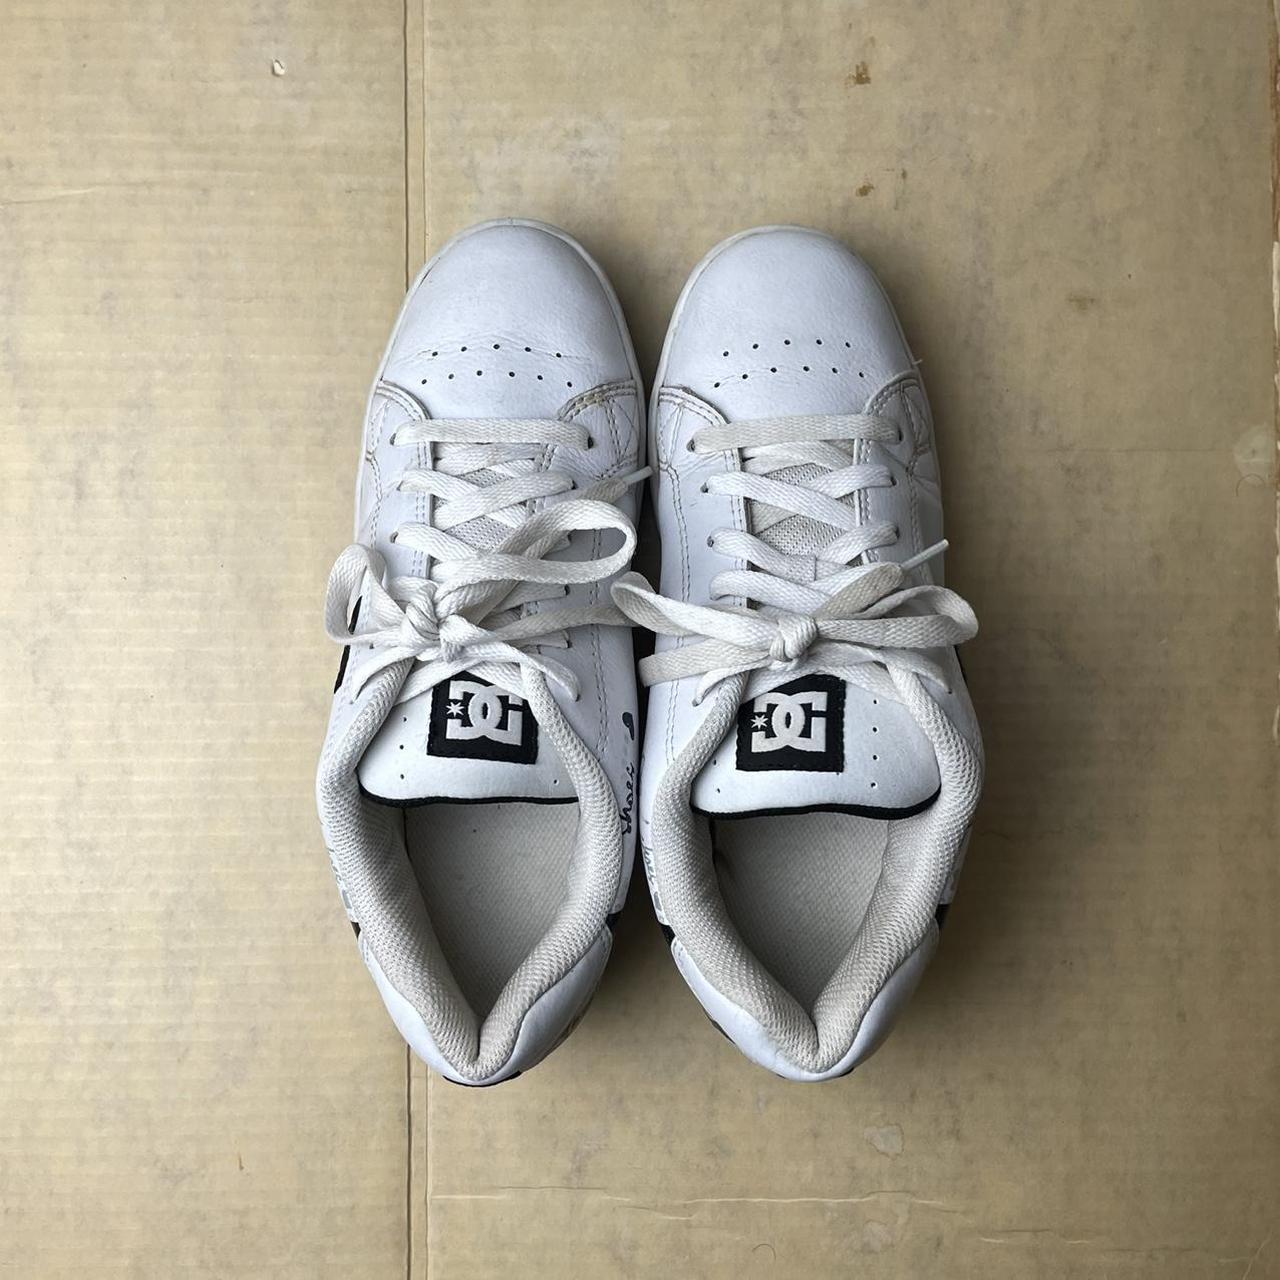 DC Shoes Women's White and Black Trainers (2)